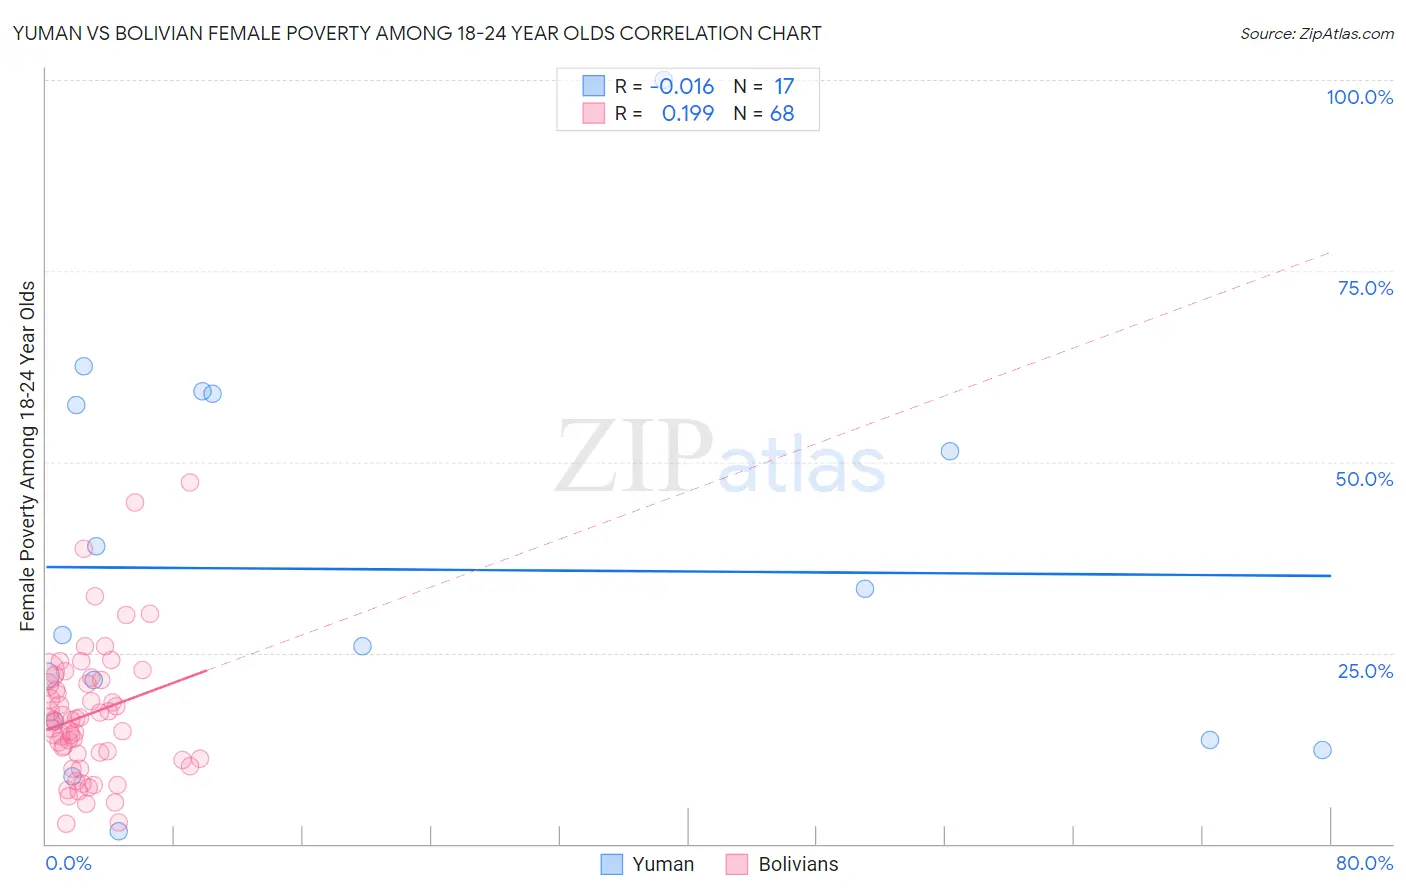 Yuman vs Bolivian Female Poverty Among 18-24 Year Olds